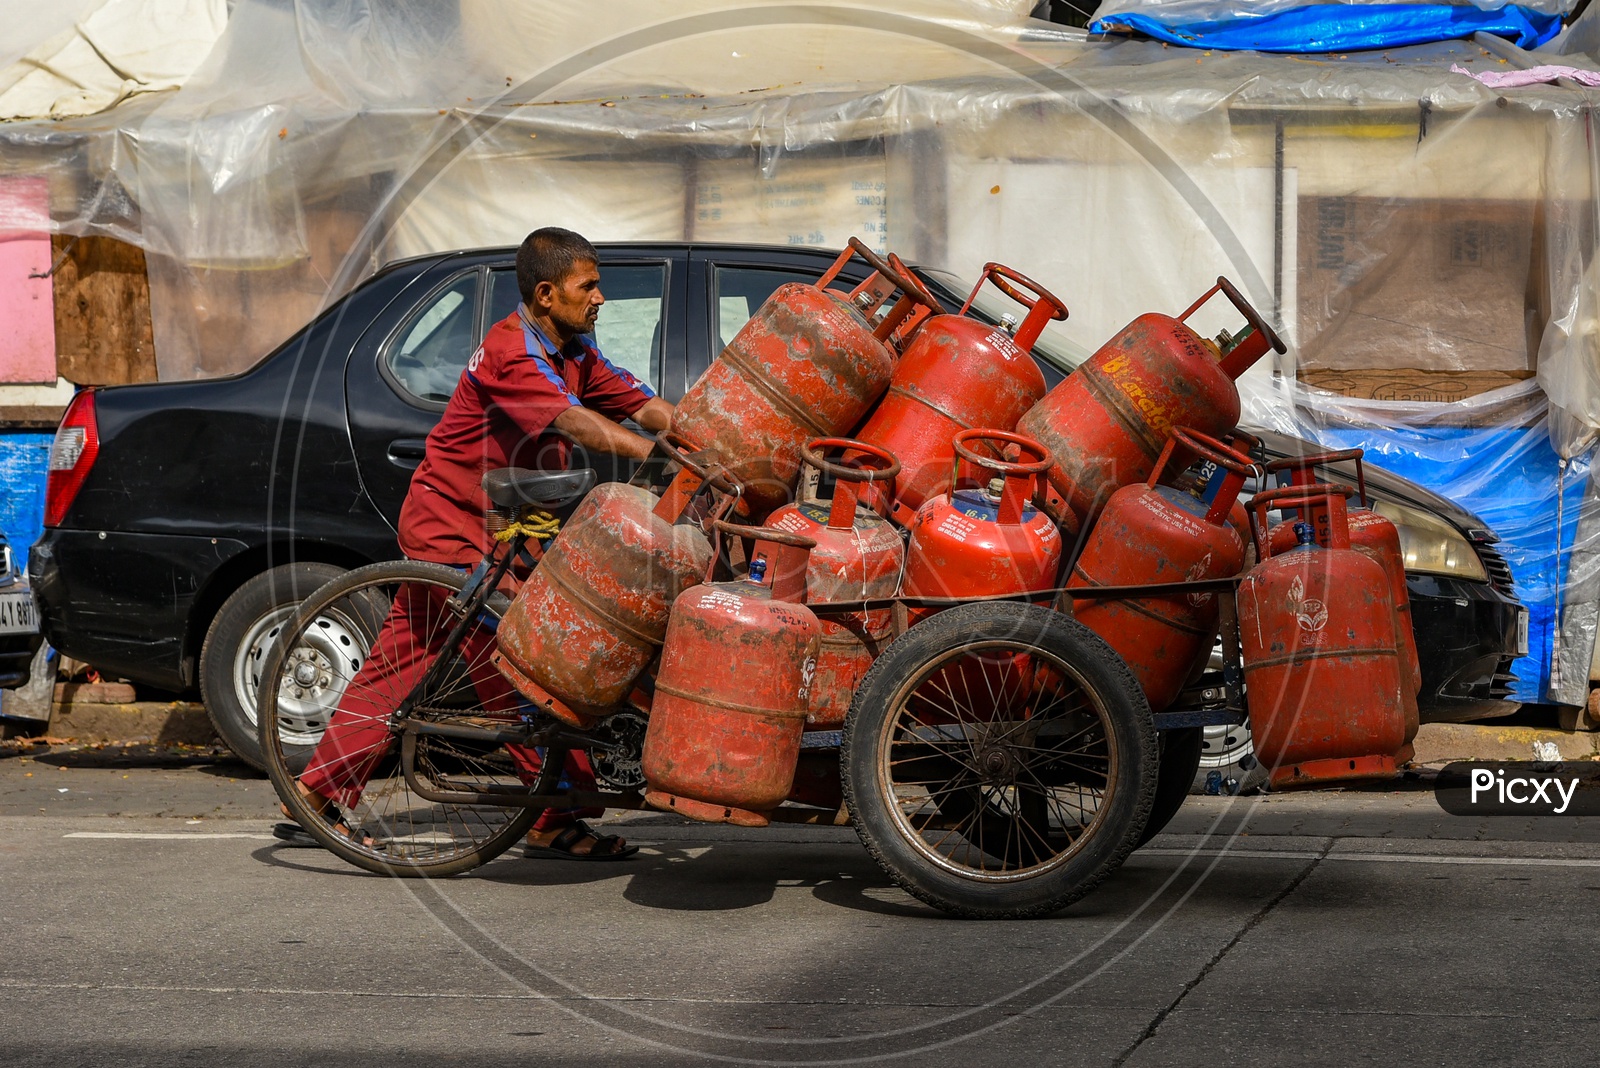 Gas cylinder delivery man uses hand pushed cart to distribute cylinders